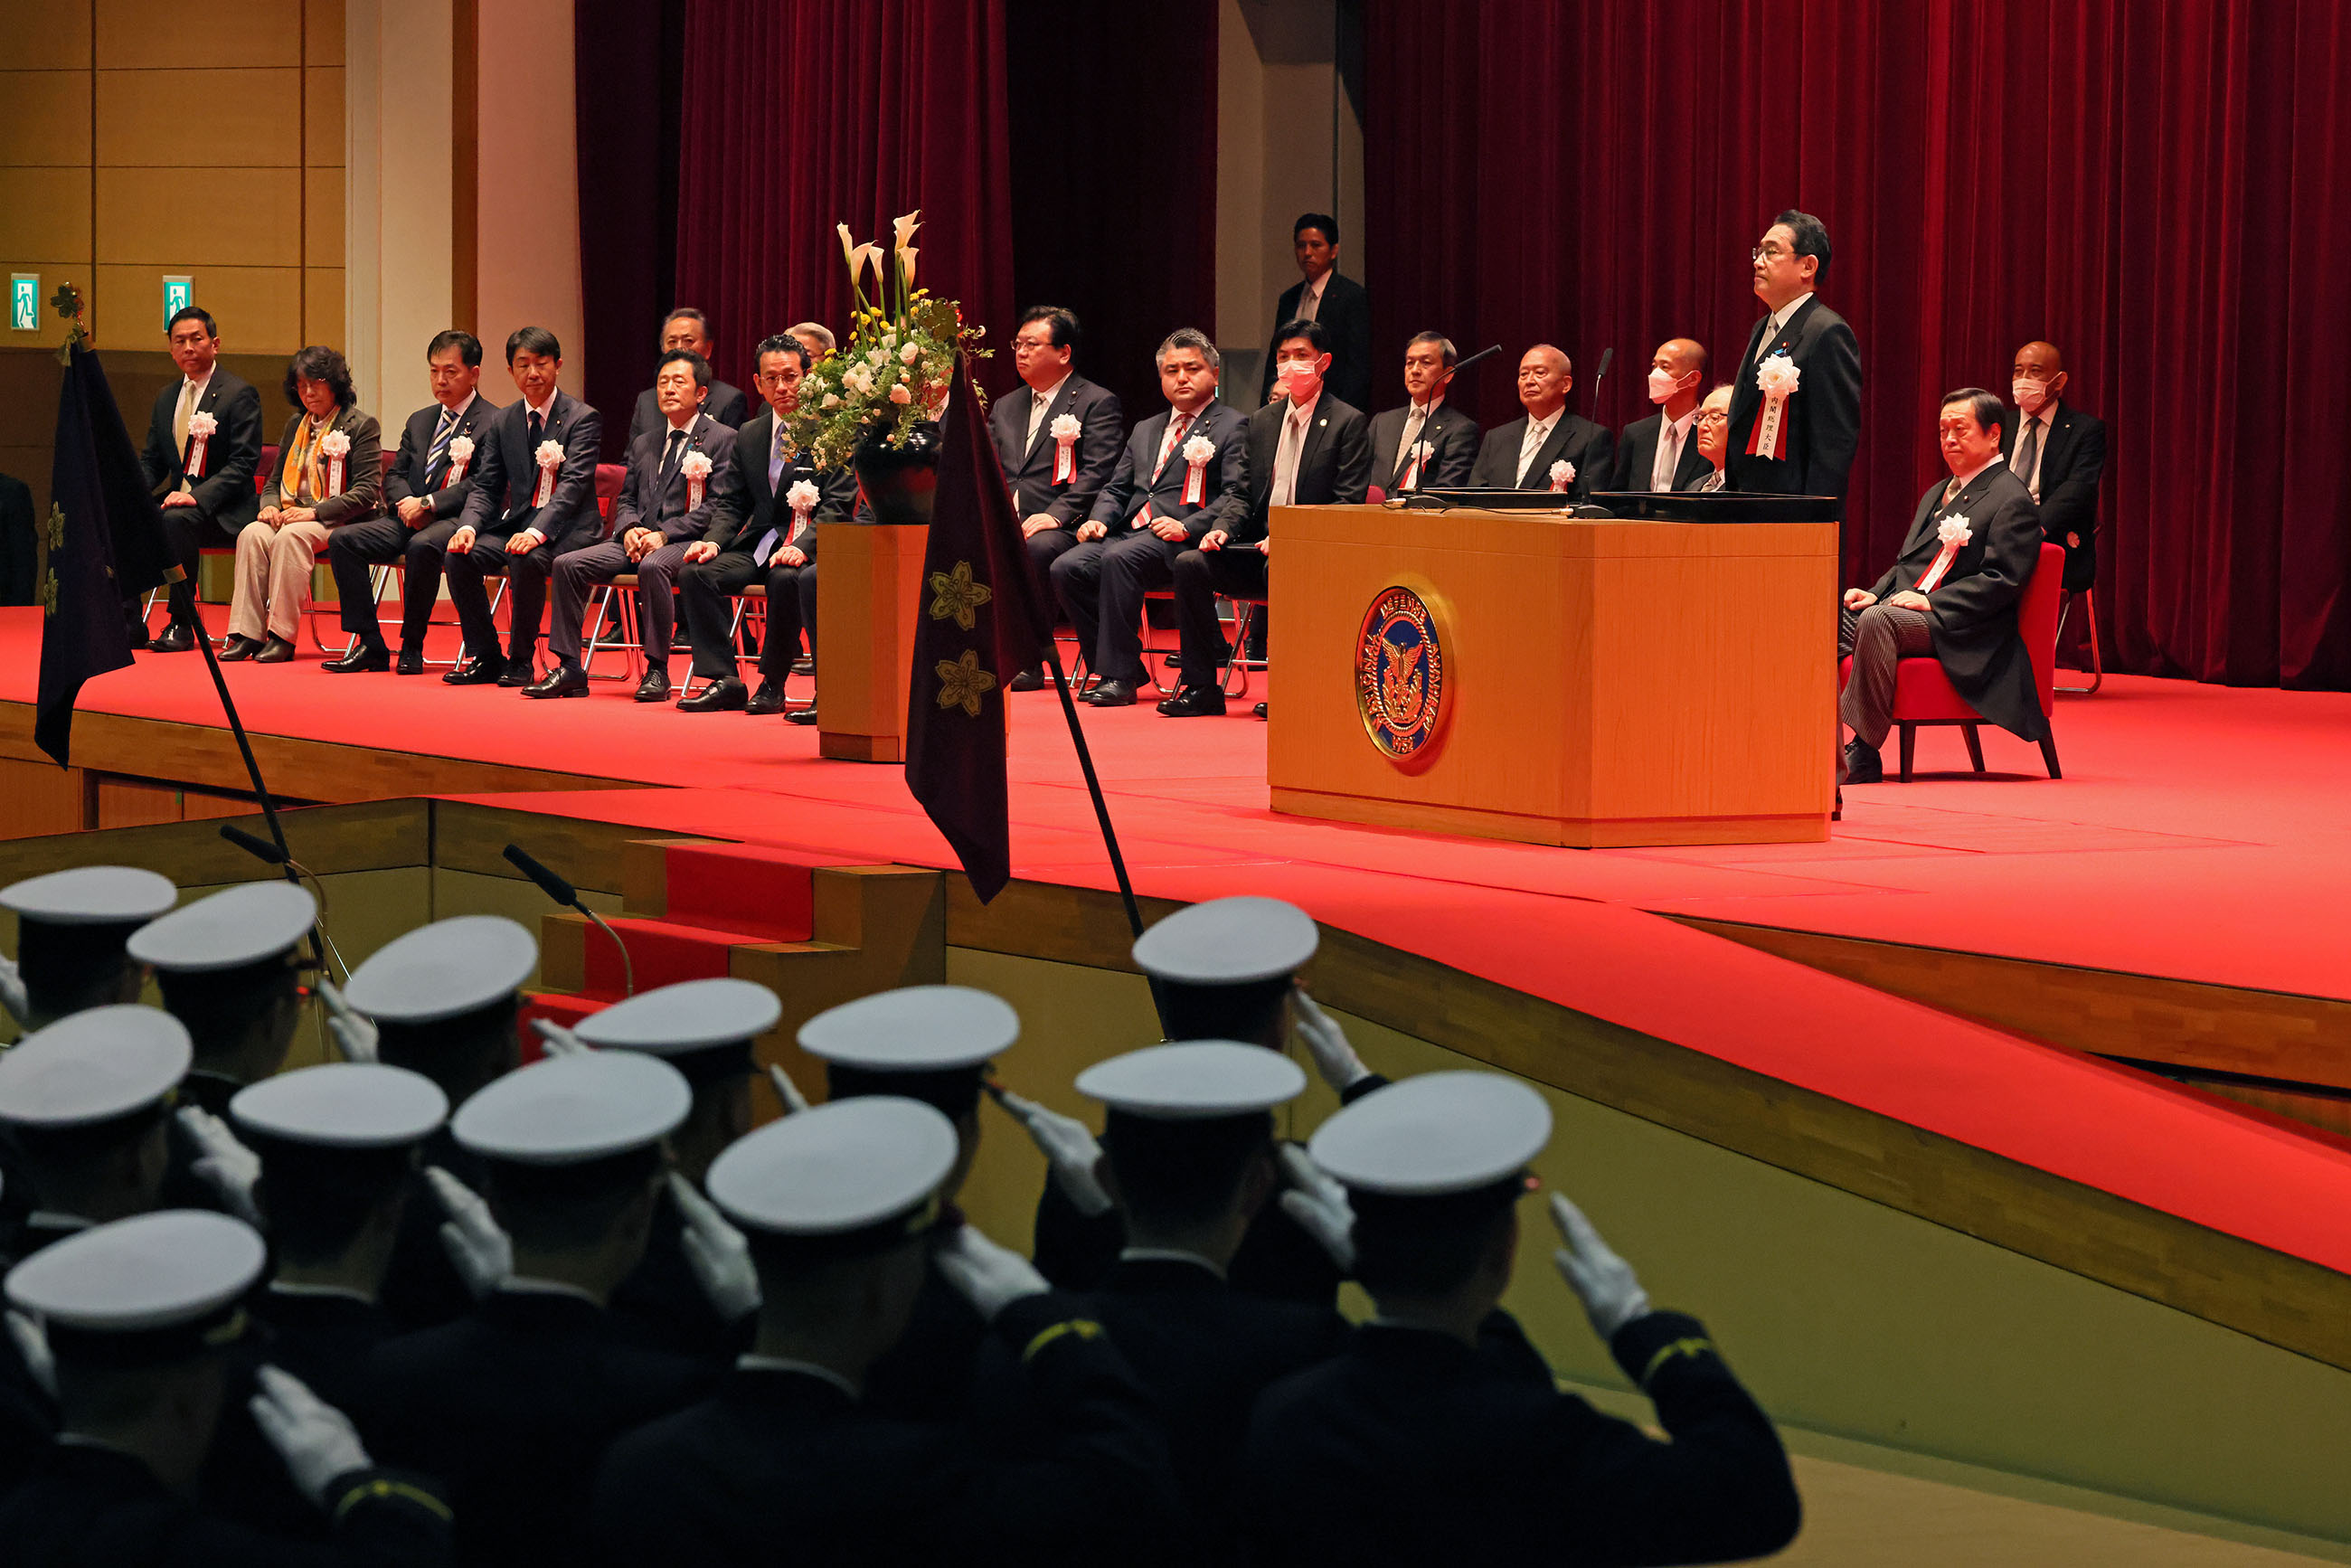 Prime Minister Kishida attending the assignment and oath of service ceremony (1)